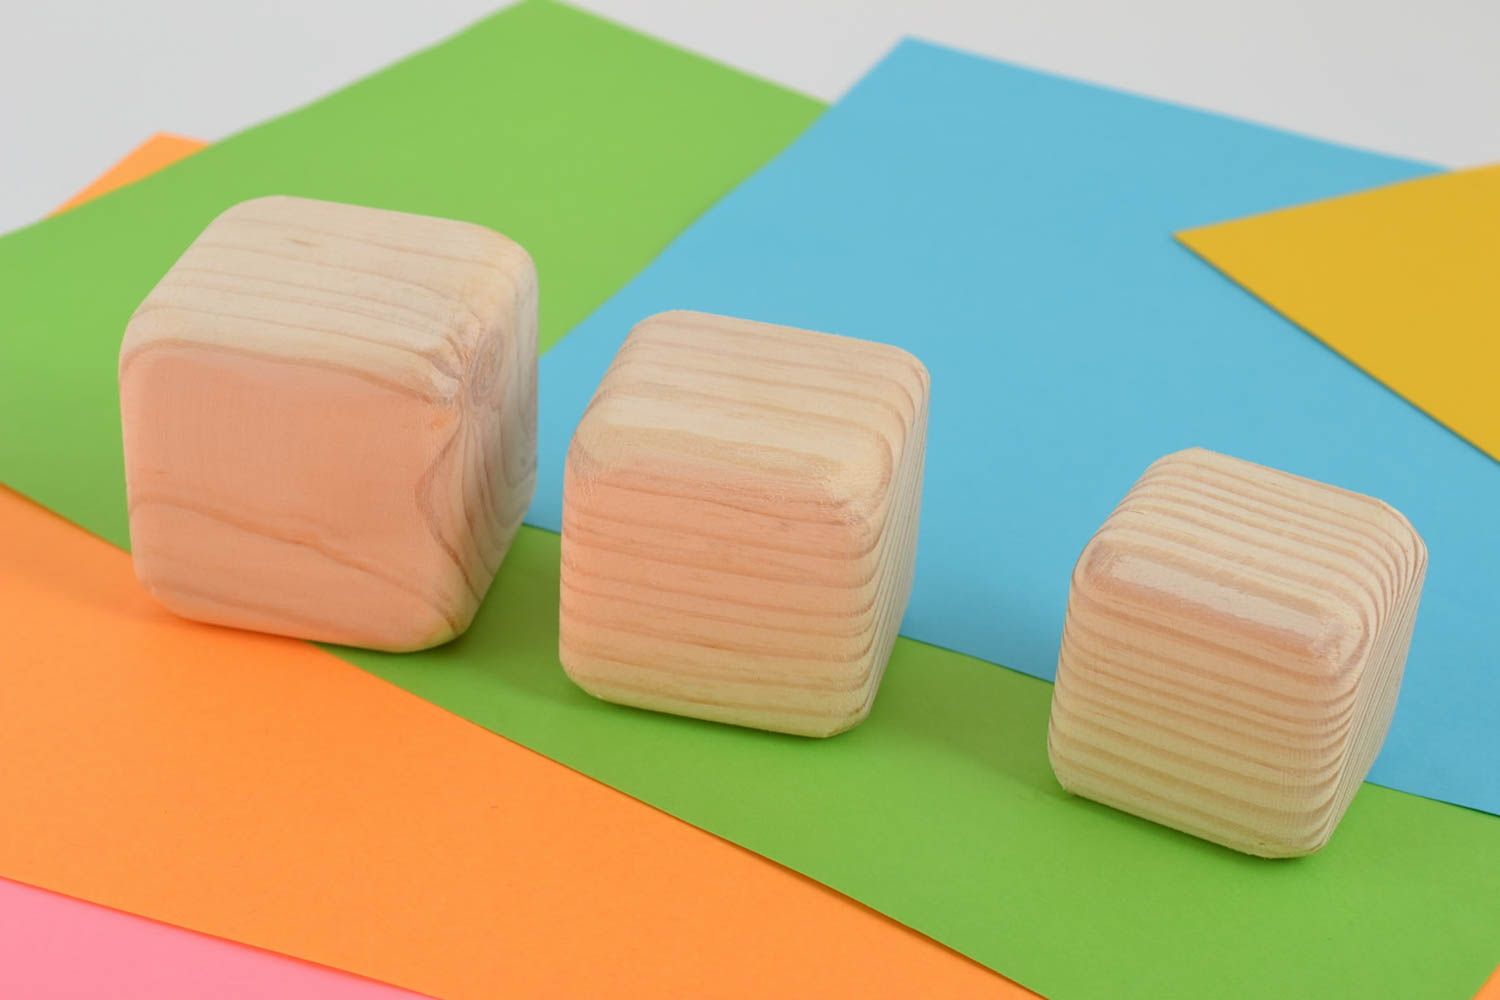 Set of 3 handmade wooden cubes wooden blocks educational toys for kids photo 1